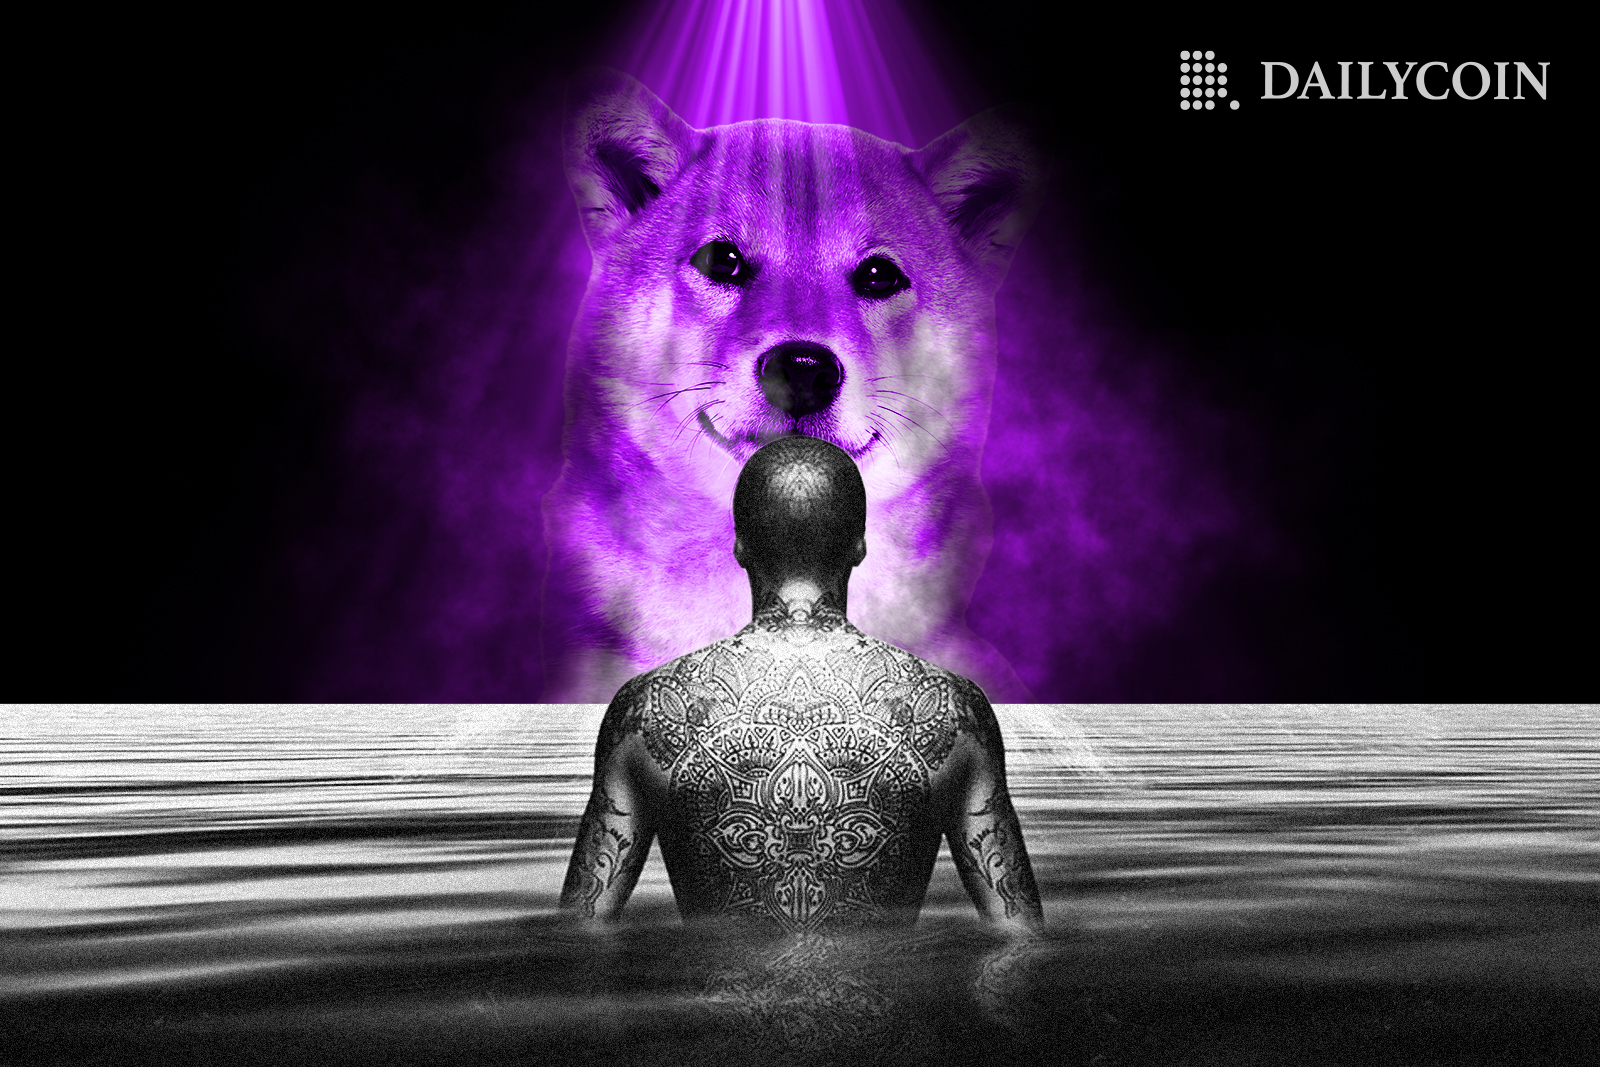 The torso of a silhouetted man exits a body of water. before him is a deific shiba inu dog highlighted in neo purple strobe lighting